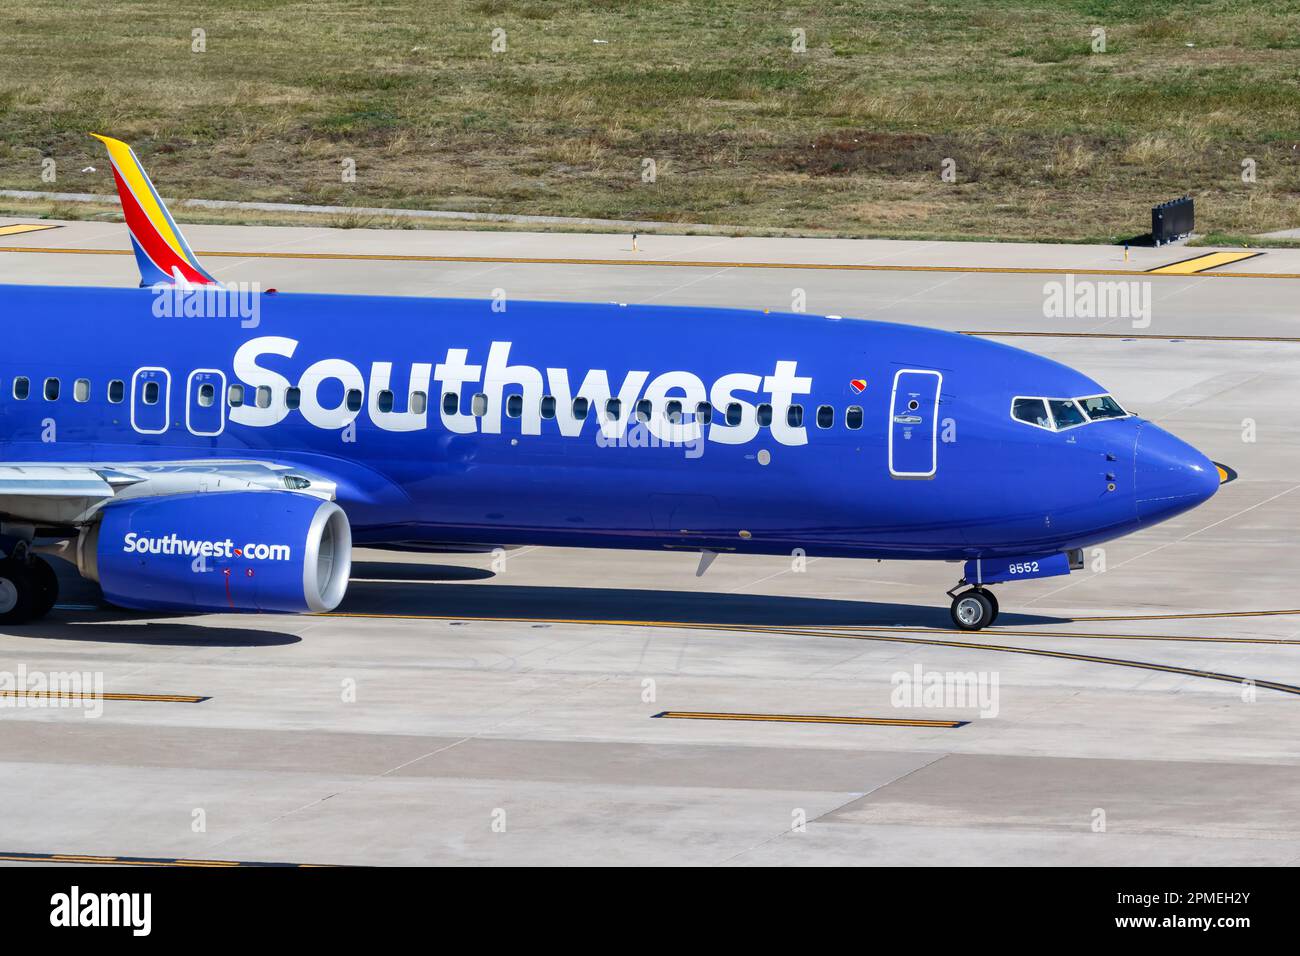 Dallas, United States – November 12, 2022: Southwest Boeing 737-800 airplane at Dallas Love Field airport (DAL) in the United States. Stock Photo